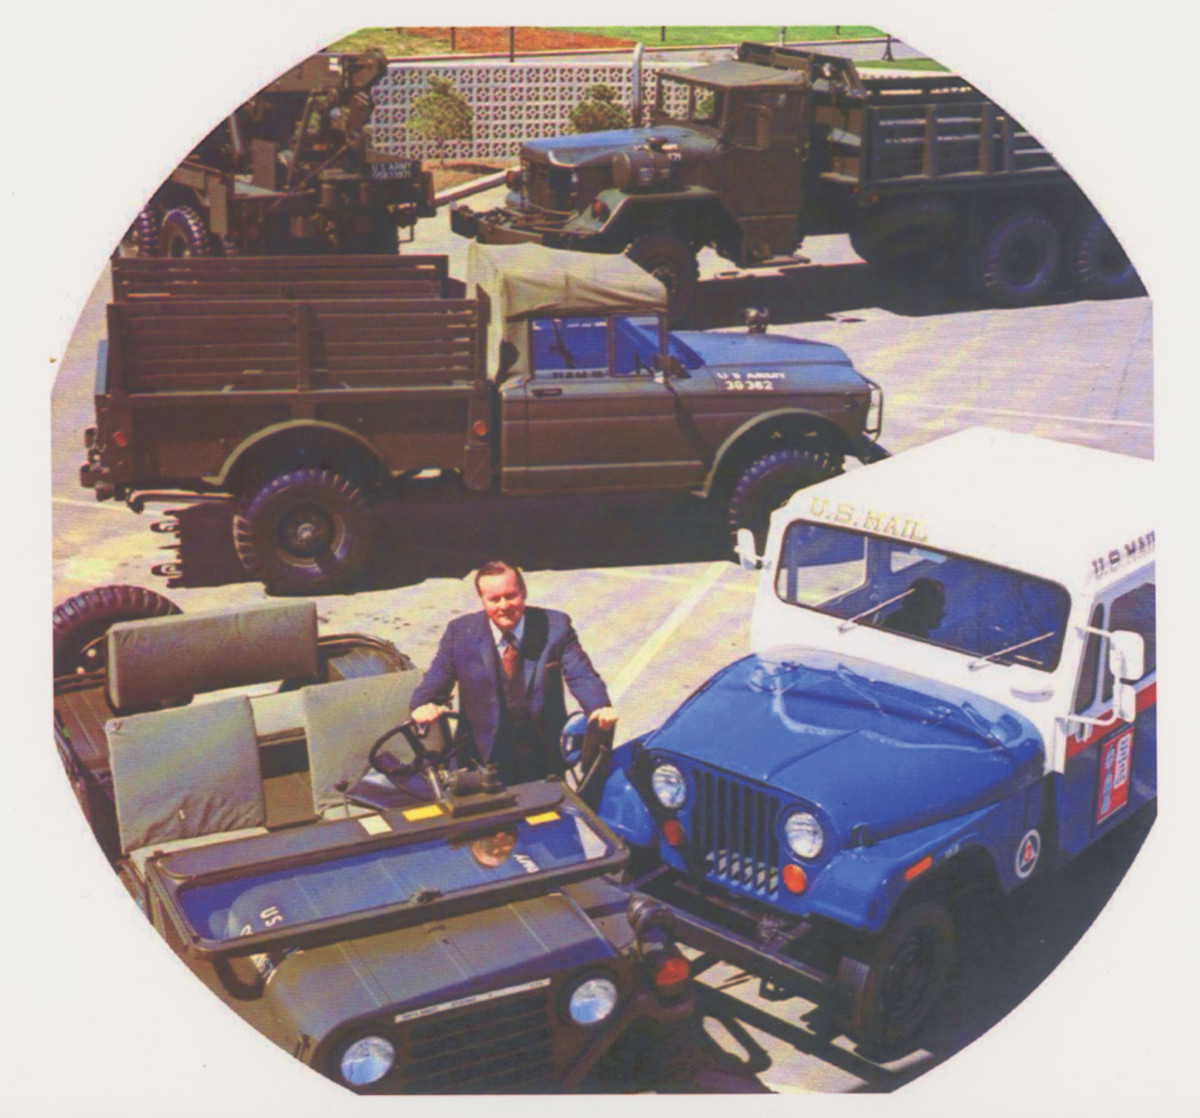 In this publicity shot, AM General president Cruse W. Moss is surrounded by a variety of the company’s products, including (clockwise from lower left), an M151A2, M715A1, M816, M821 and DJ-5A. This image appeared in the 1971 American Motors stockholders annual report.